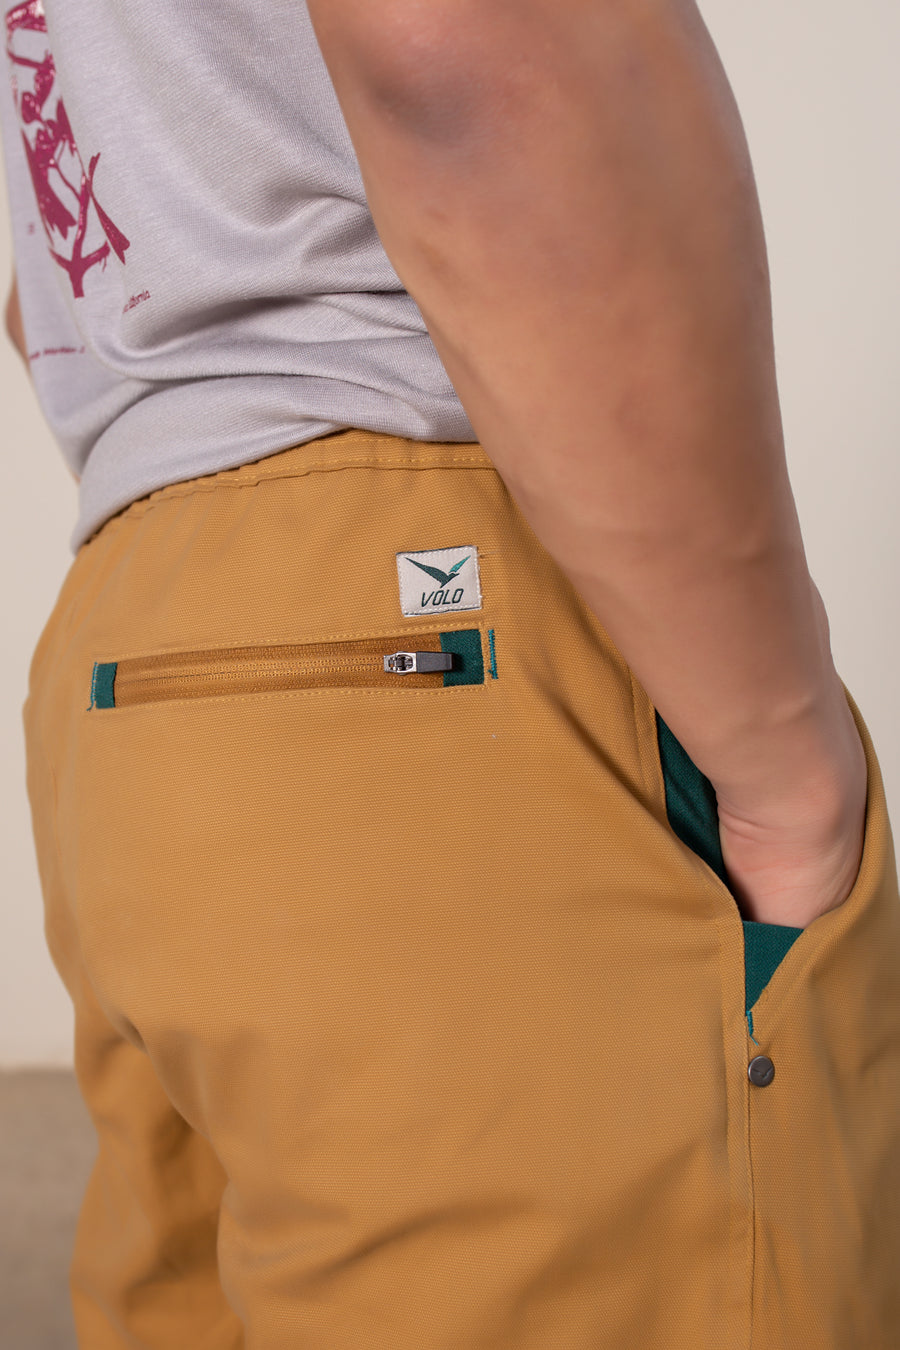 Men's Sequoia Canvas Pant in Gold | VOLO Apparel | Made with an ultra durable stretch cotton canvas, the Sequoia Canvas Pant is our ultimate six pocket lifestyle pant. Featuring a modern slim fit and a 33 inch inseam, a 3 point gusset, snap button security pockets, 2 zipper pockets and the comfort of durable canvas, these are your go to adventure pants that can handle anything you throw at them.